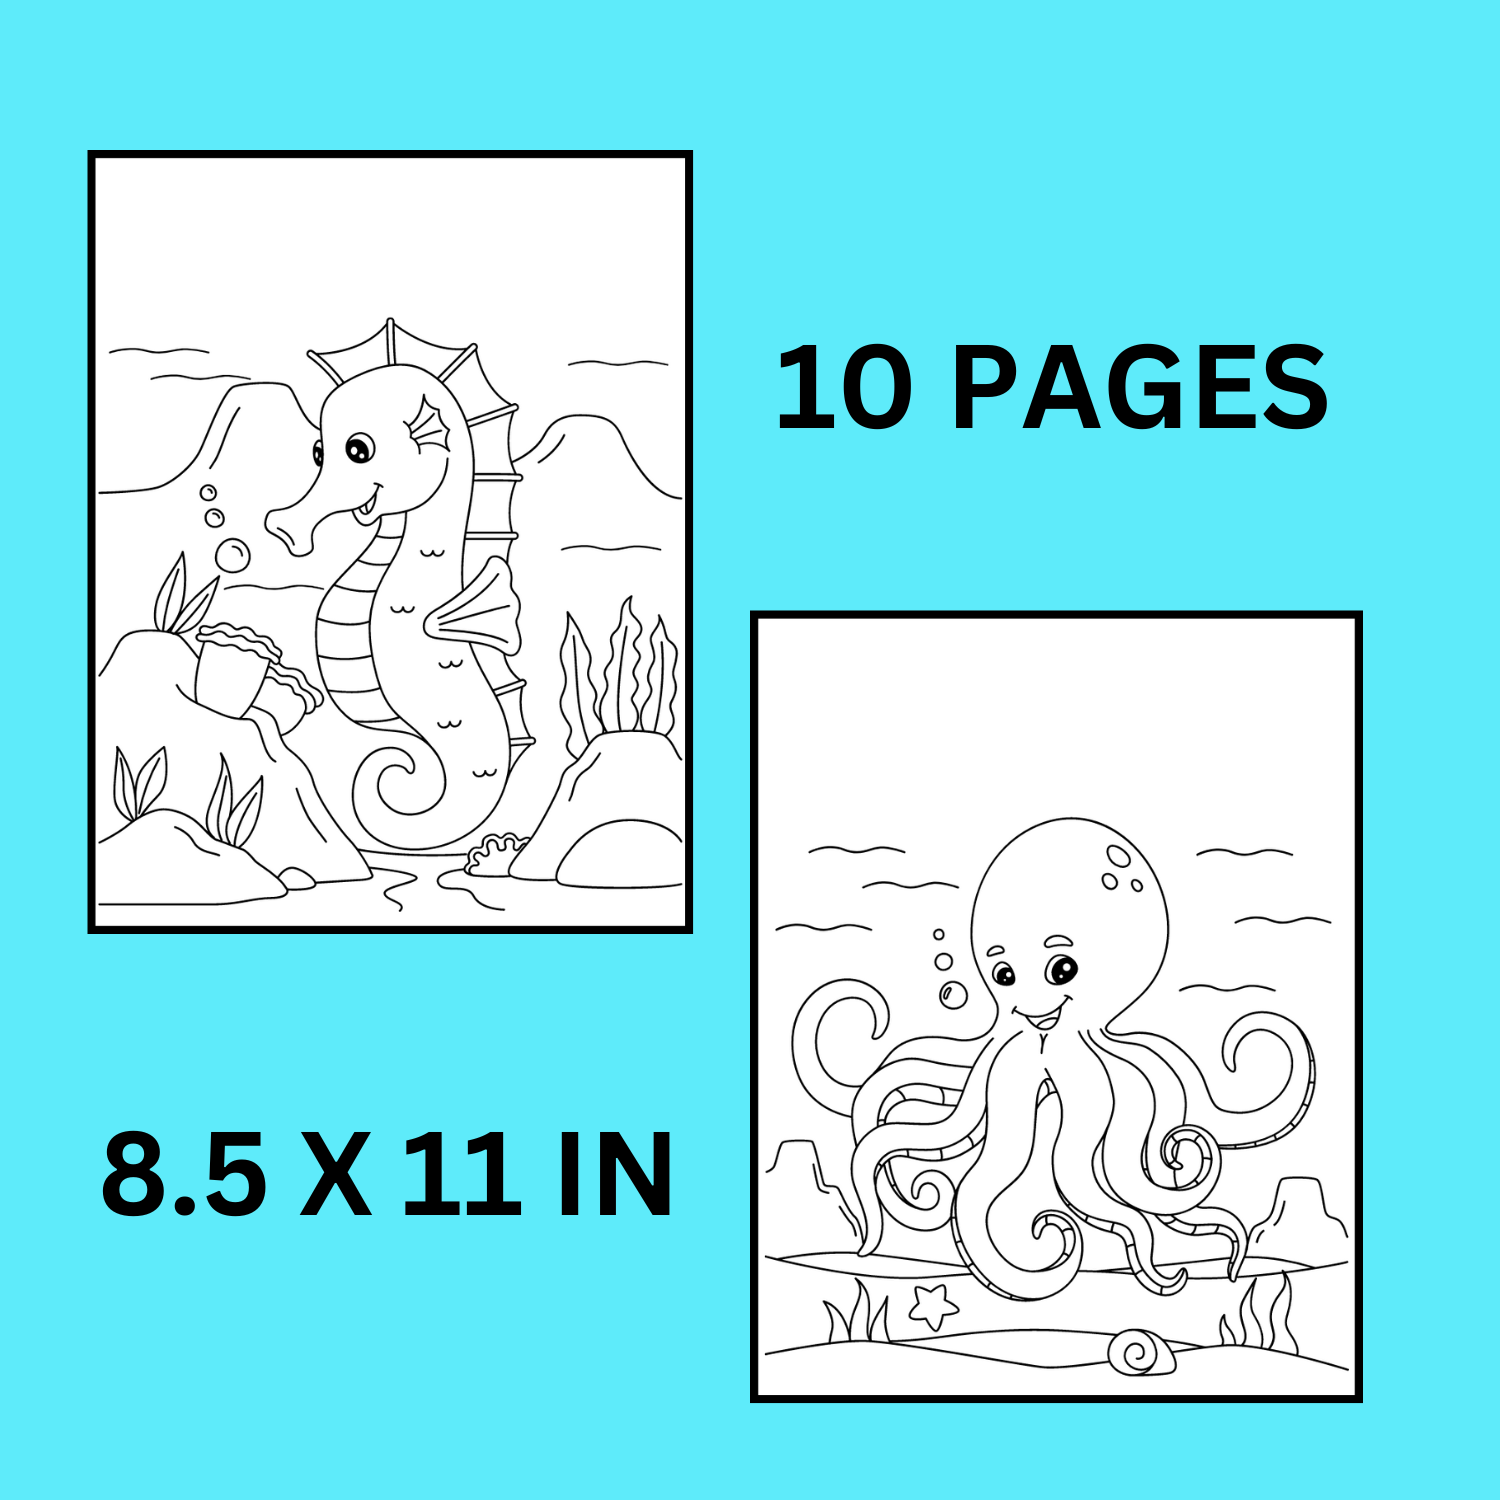 Ocean and sea coloring pages sea animals coloring sheets beach activity made by teachers